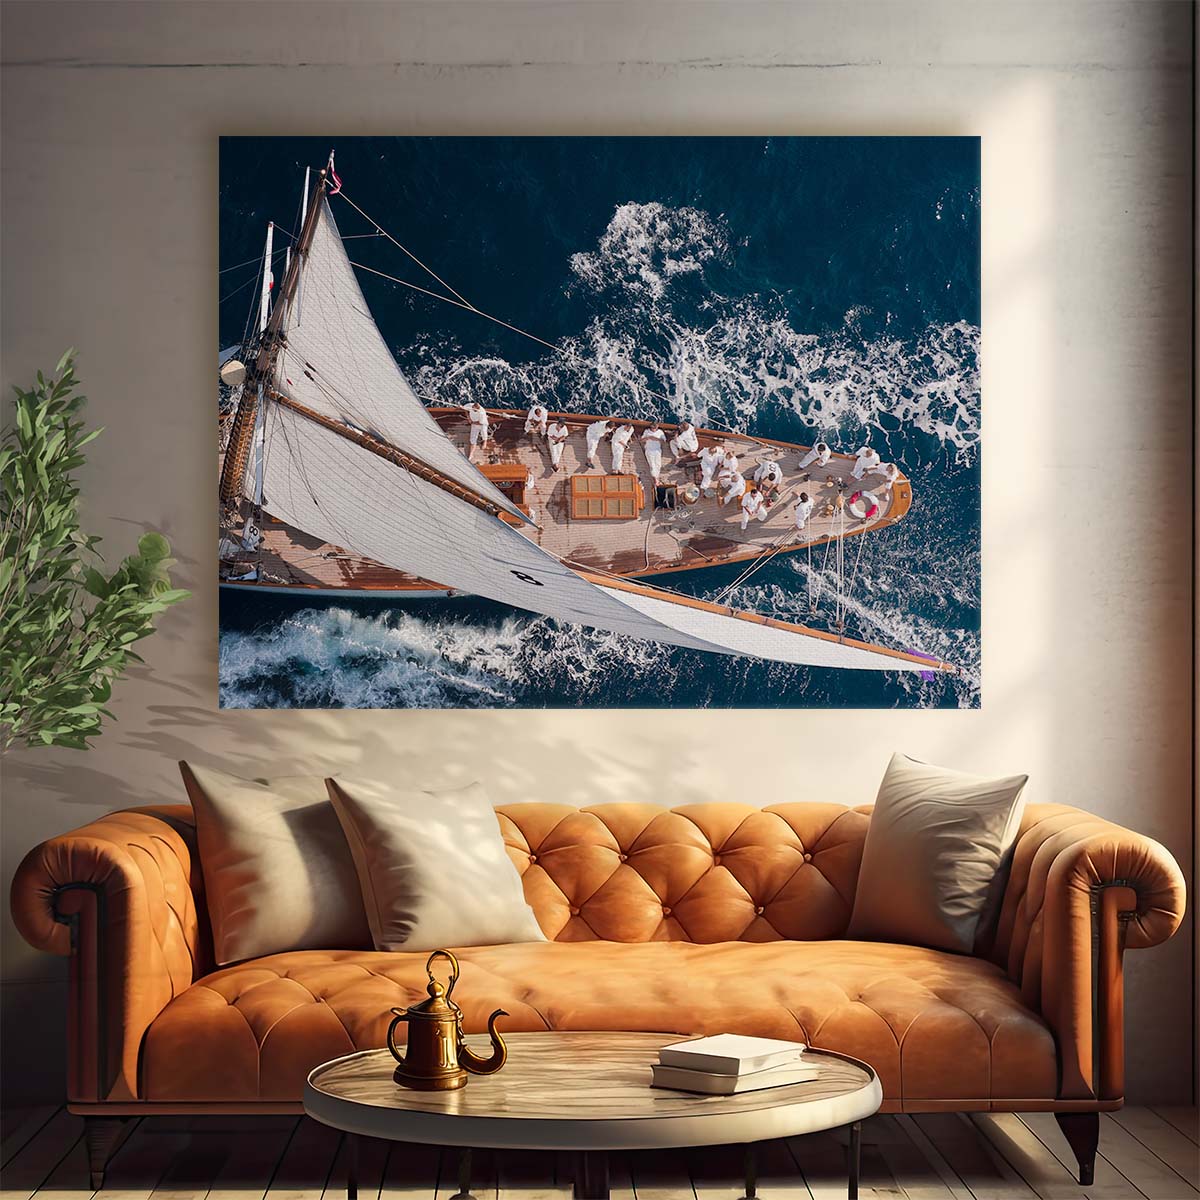 Regatta Elegance Cannes Yacht Race Seascape Wall Art by Luxuriance Designs. Made in USA.